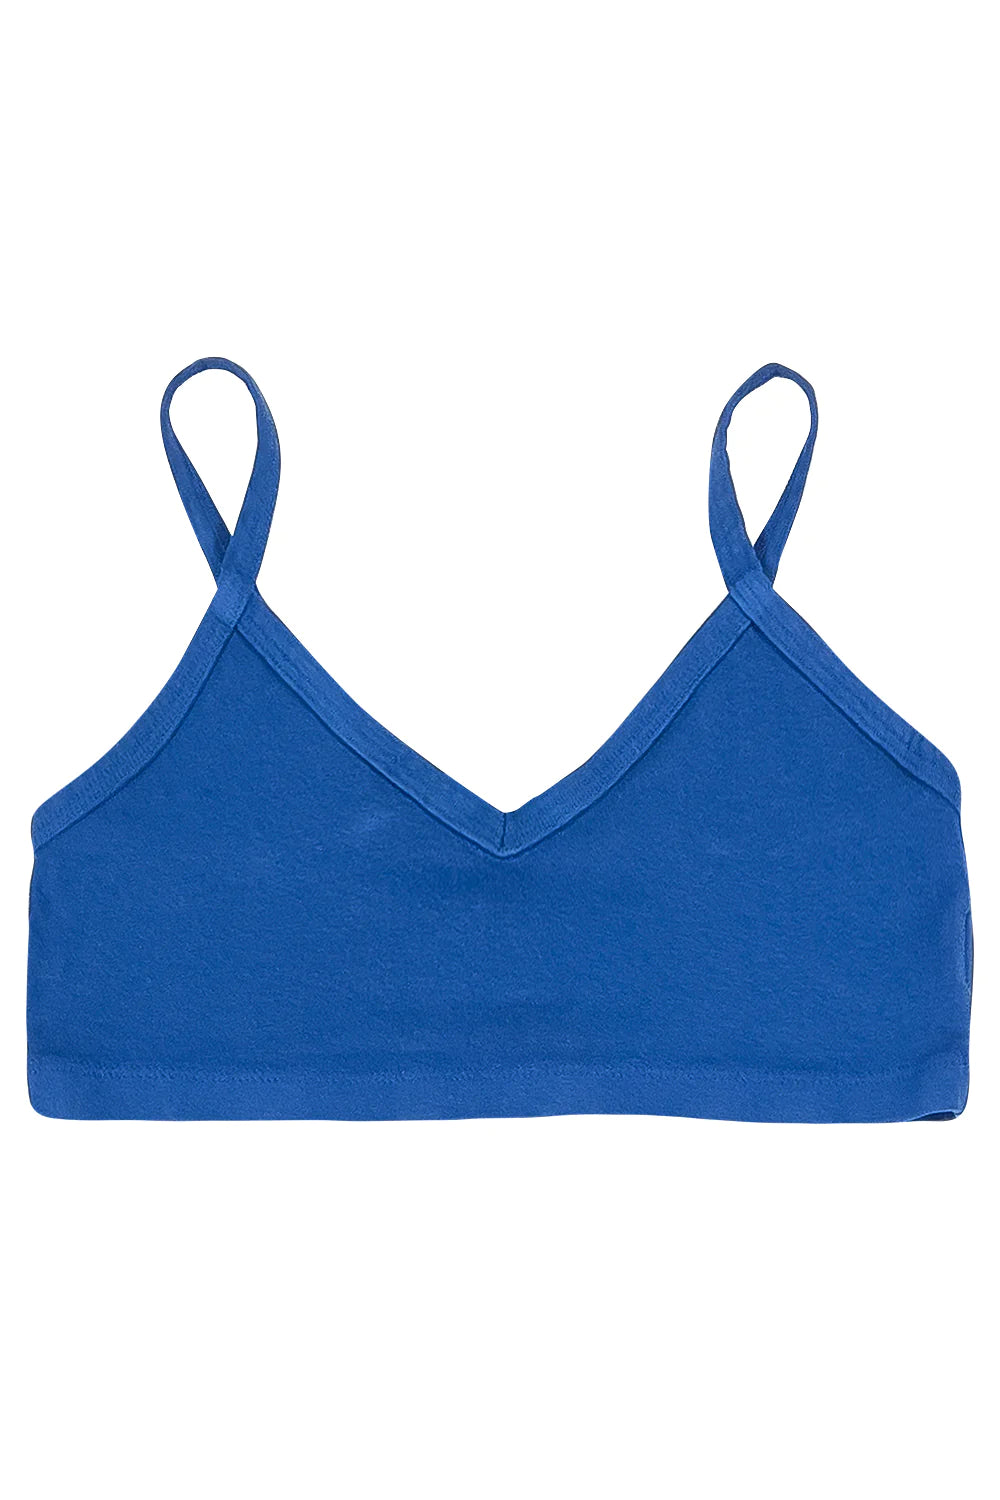 BKEssentials Full Coverage Lined Bralette - Women's Intimates in Pearl Blue